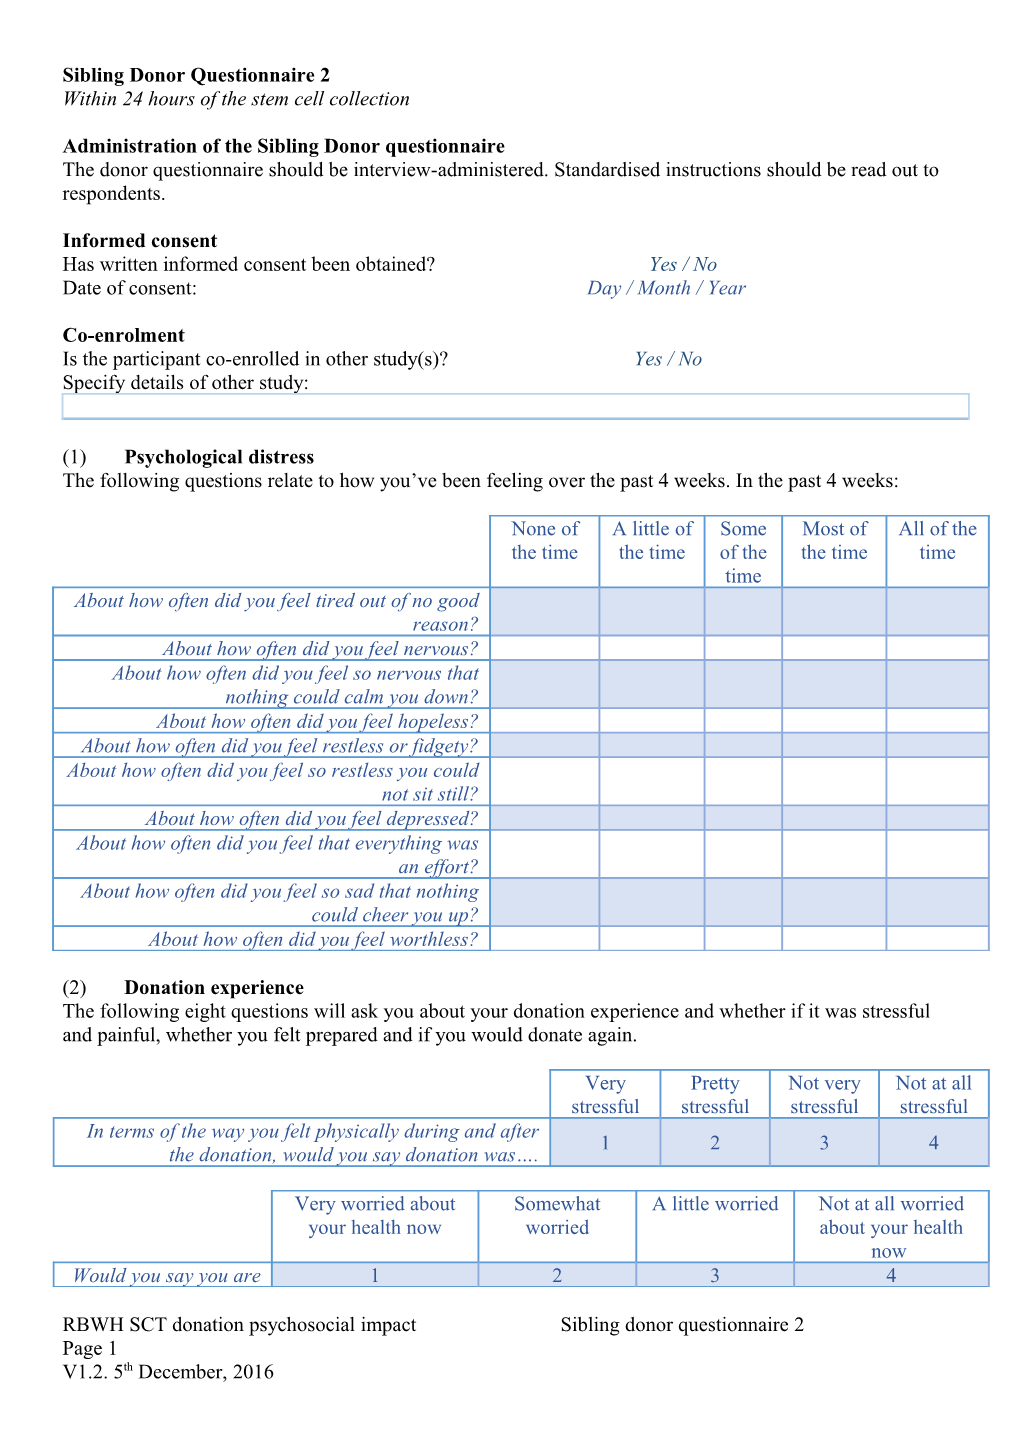 Administration of the Sibling Donor Questionnaire